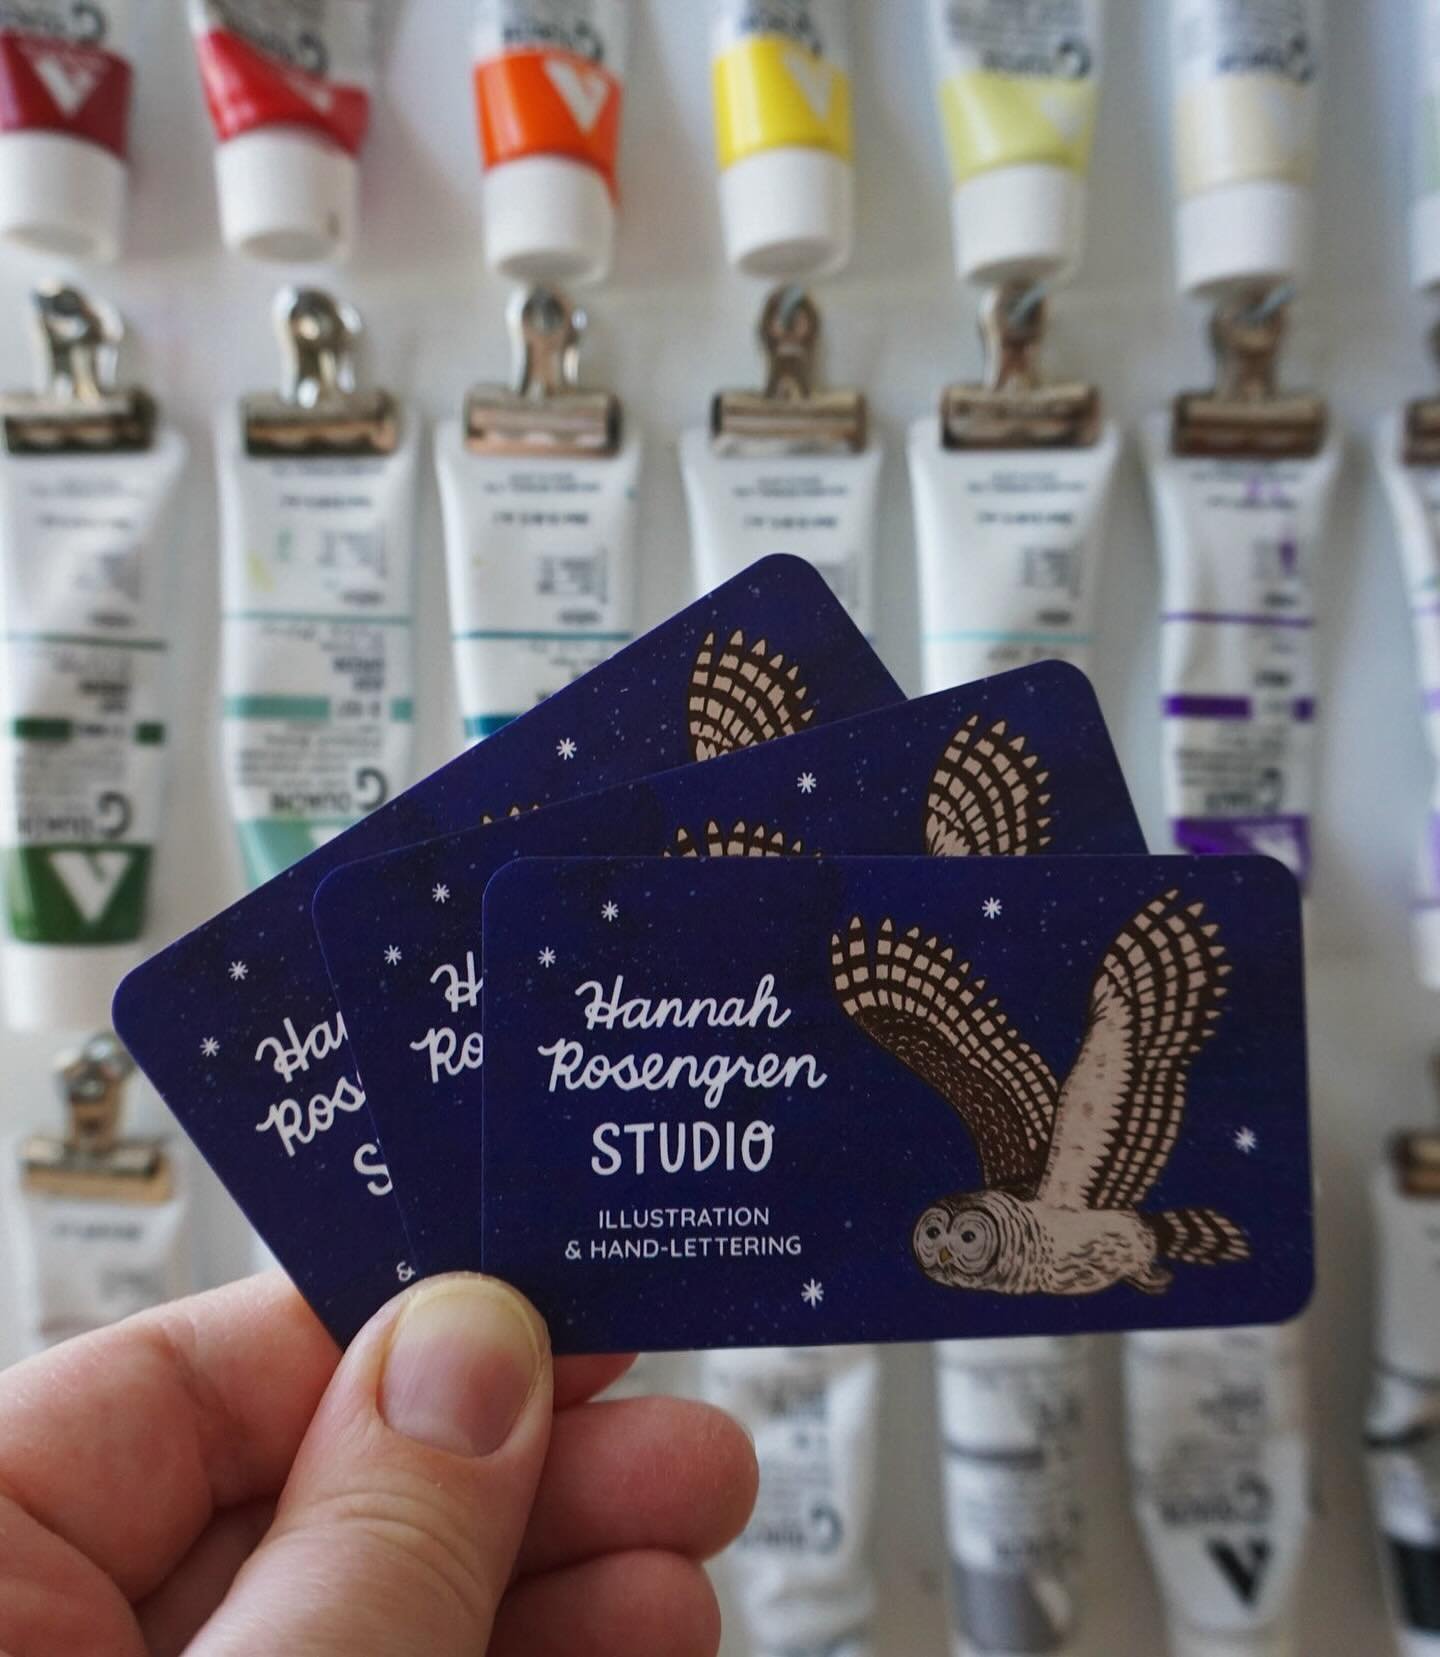 New business cards just arrived! Finally ordered the rounded-edge cards of my dreams from @moo 🦉✨